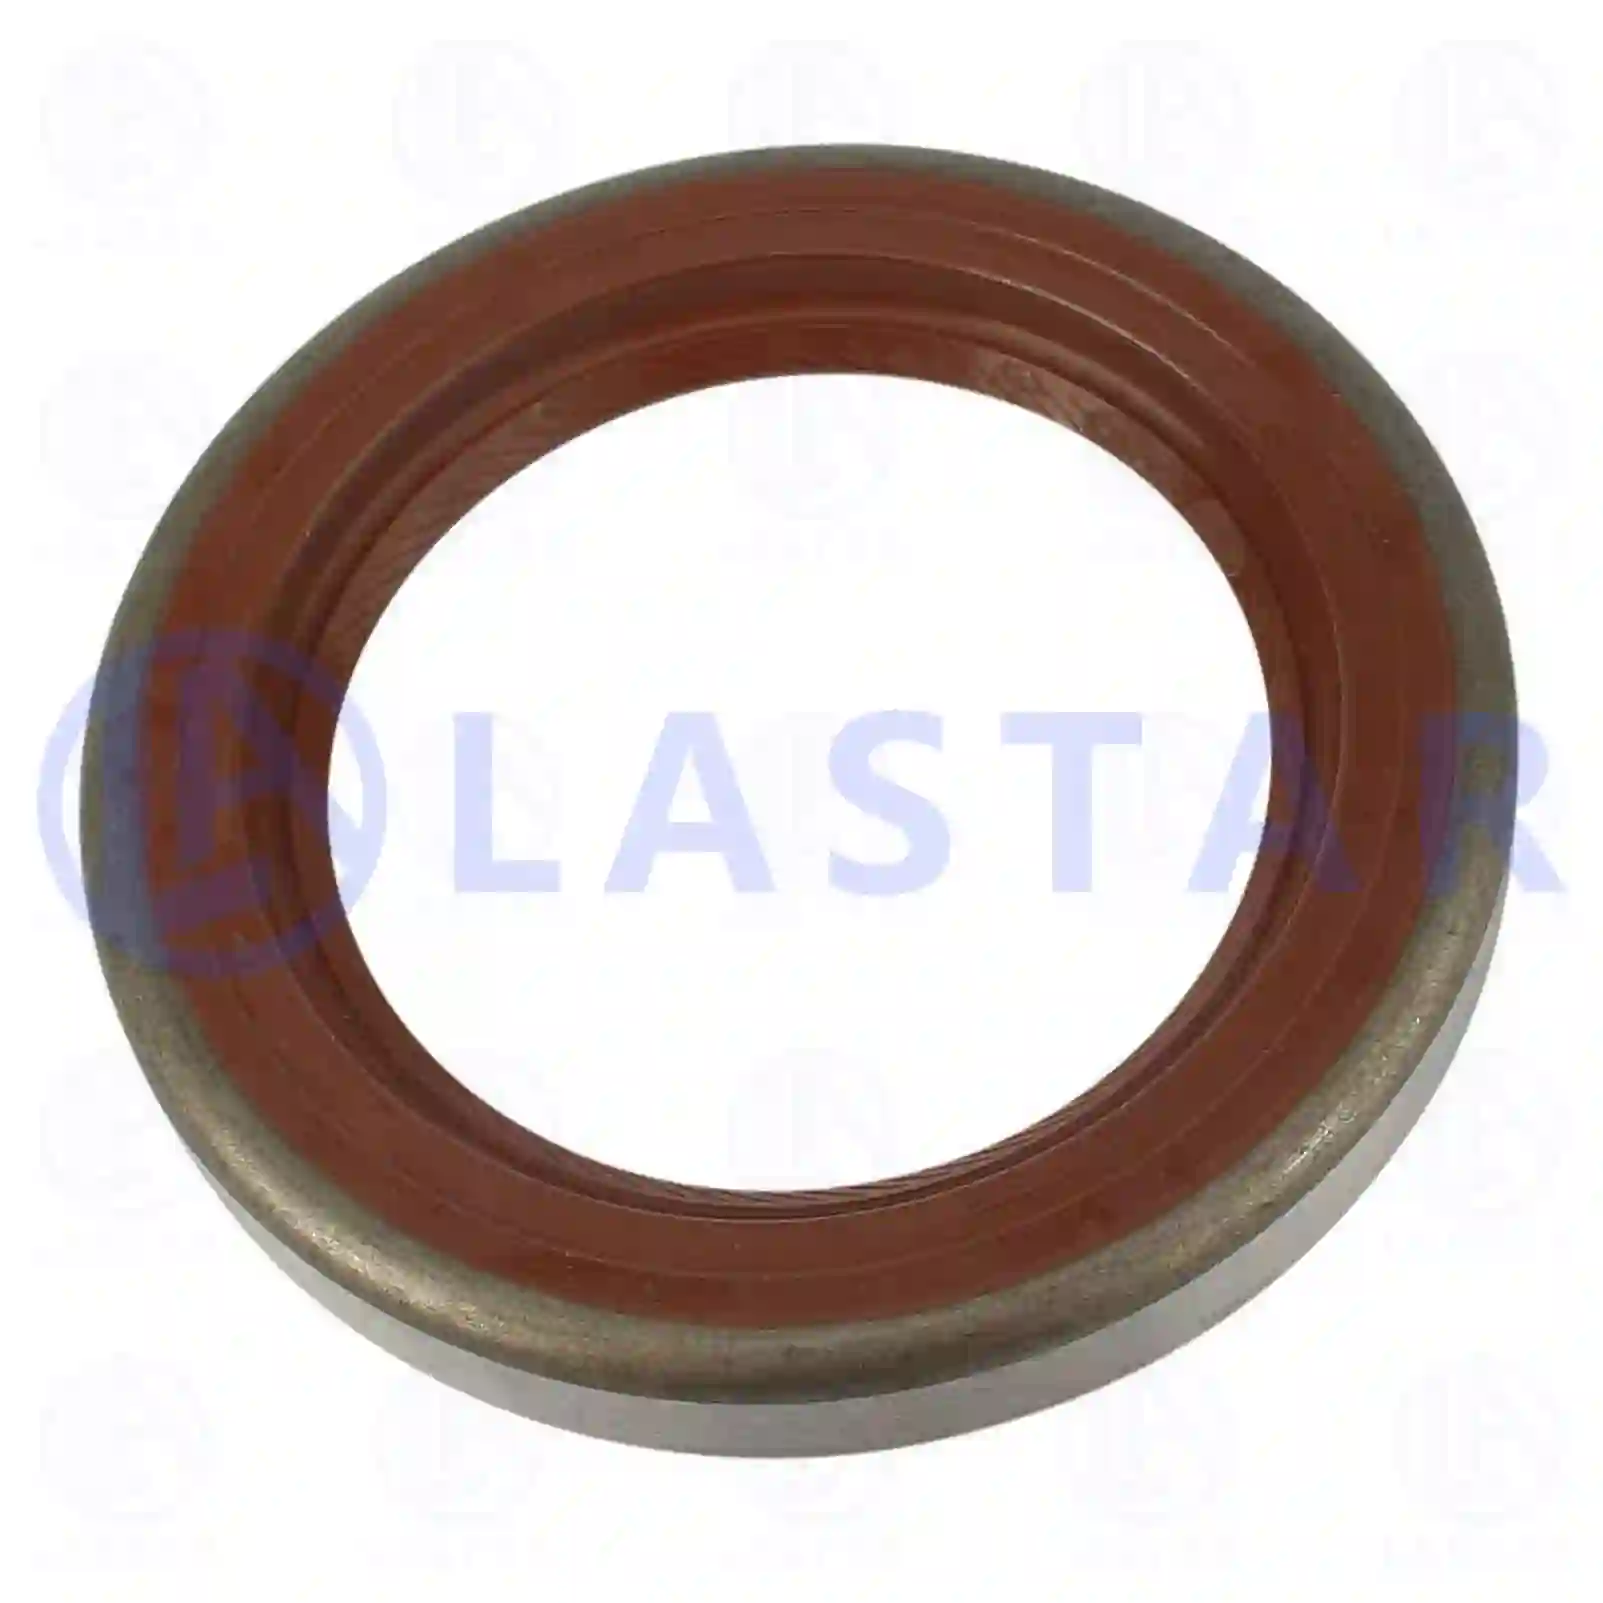 Oil seal, 77731953, 140540, 608590, 693402, 6110376, 09933054, 42487486, 81965020226, 90900952043, 90901802043, 0079972047, 5000590828, 6876126 ||  77731953 Lastar Spare Part | Truck Spare Parts, Auotomotive Spare Parts Oil seal, 77731953, 140540, 608590, 693402, 6110376, 09933054, 42487486, 81965020226, 90900952043, 90901802043, 0079972047, 5000590828, 6876126 ||  77731953 Lastar Spare Part | Truck Spare Parts, Auotomotive Spare Parts